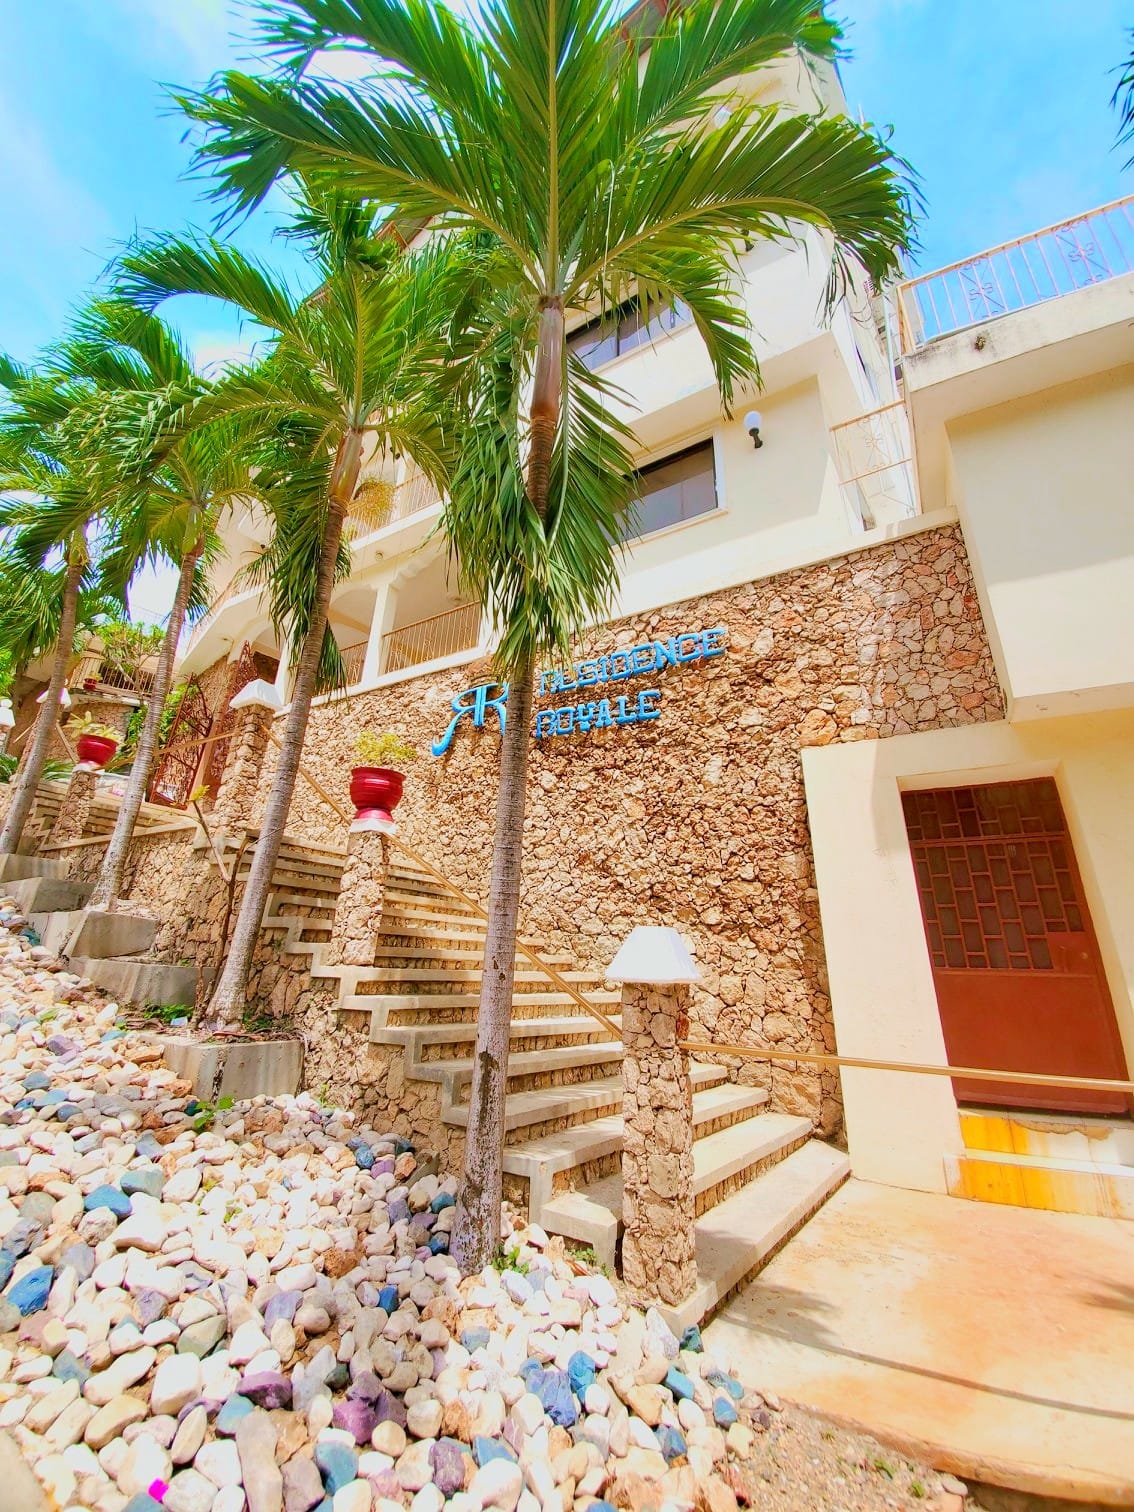 Discover the Rich Cultural Heritage of Cap-Haitien with Residence Royale Hotel